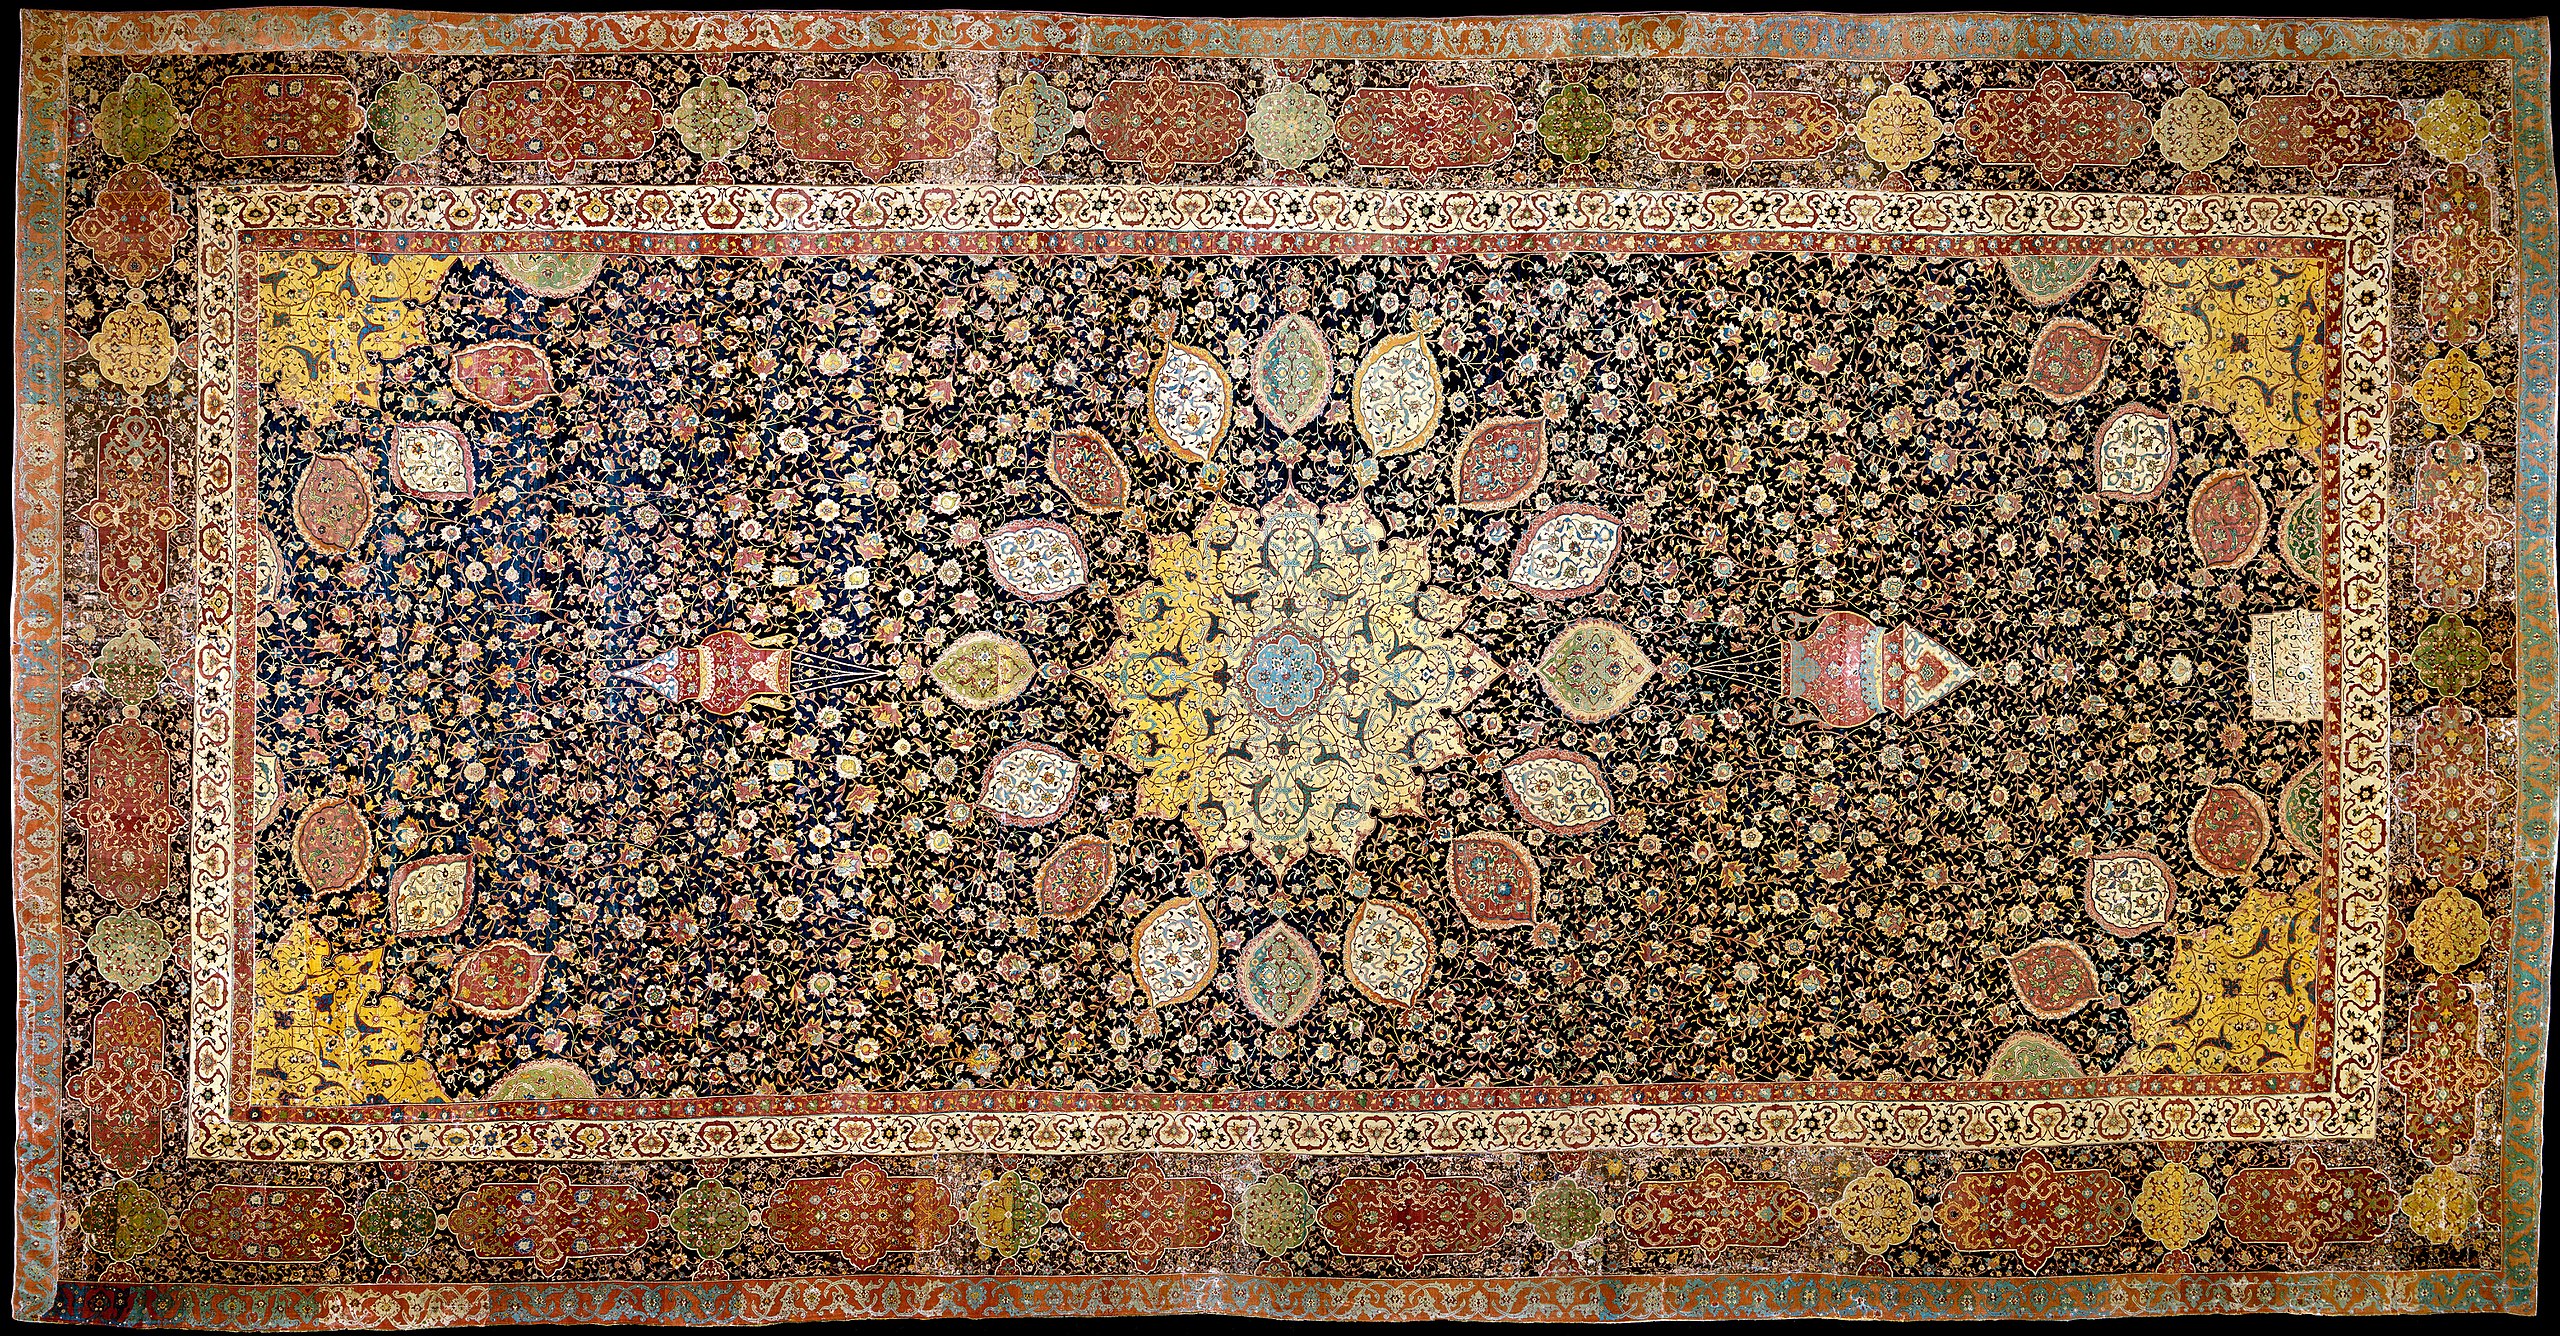 Medallion Carpet, The Ardabil Carpet, Unknown artist (Maqsud Kashani is named on the carpet's inscription), Persian: Safavid Dynasty, silk warps and wefts with wool pile (25 million knots, 340 per sq. inch), 1539–40 C.E., Tabriz, Kashan, Isfahan or Kirman, Iran (Victoria & Albert Museum, London)